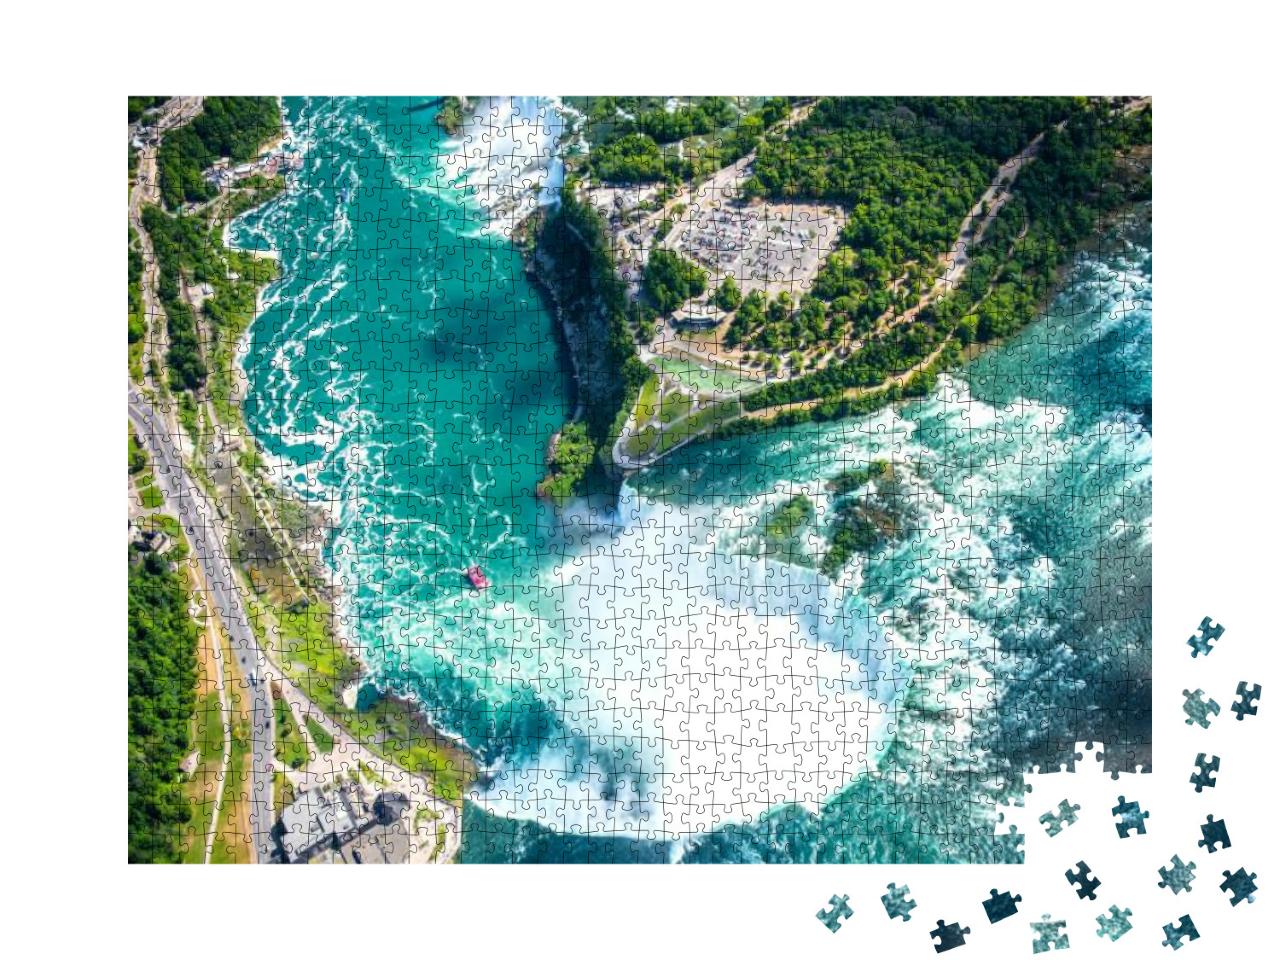 Niagara Falls Aerial View from Helicopter, Canadian Falls... Jigsaw Puzzle with 1000 pieces